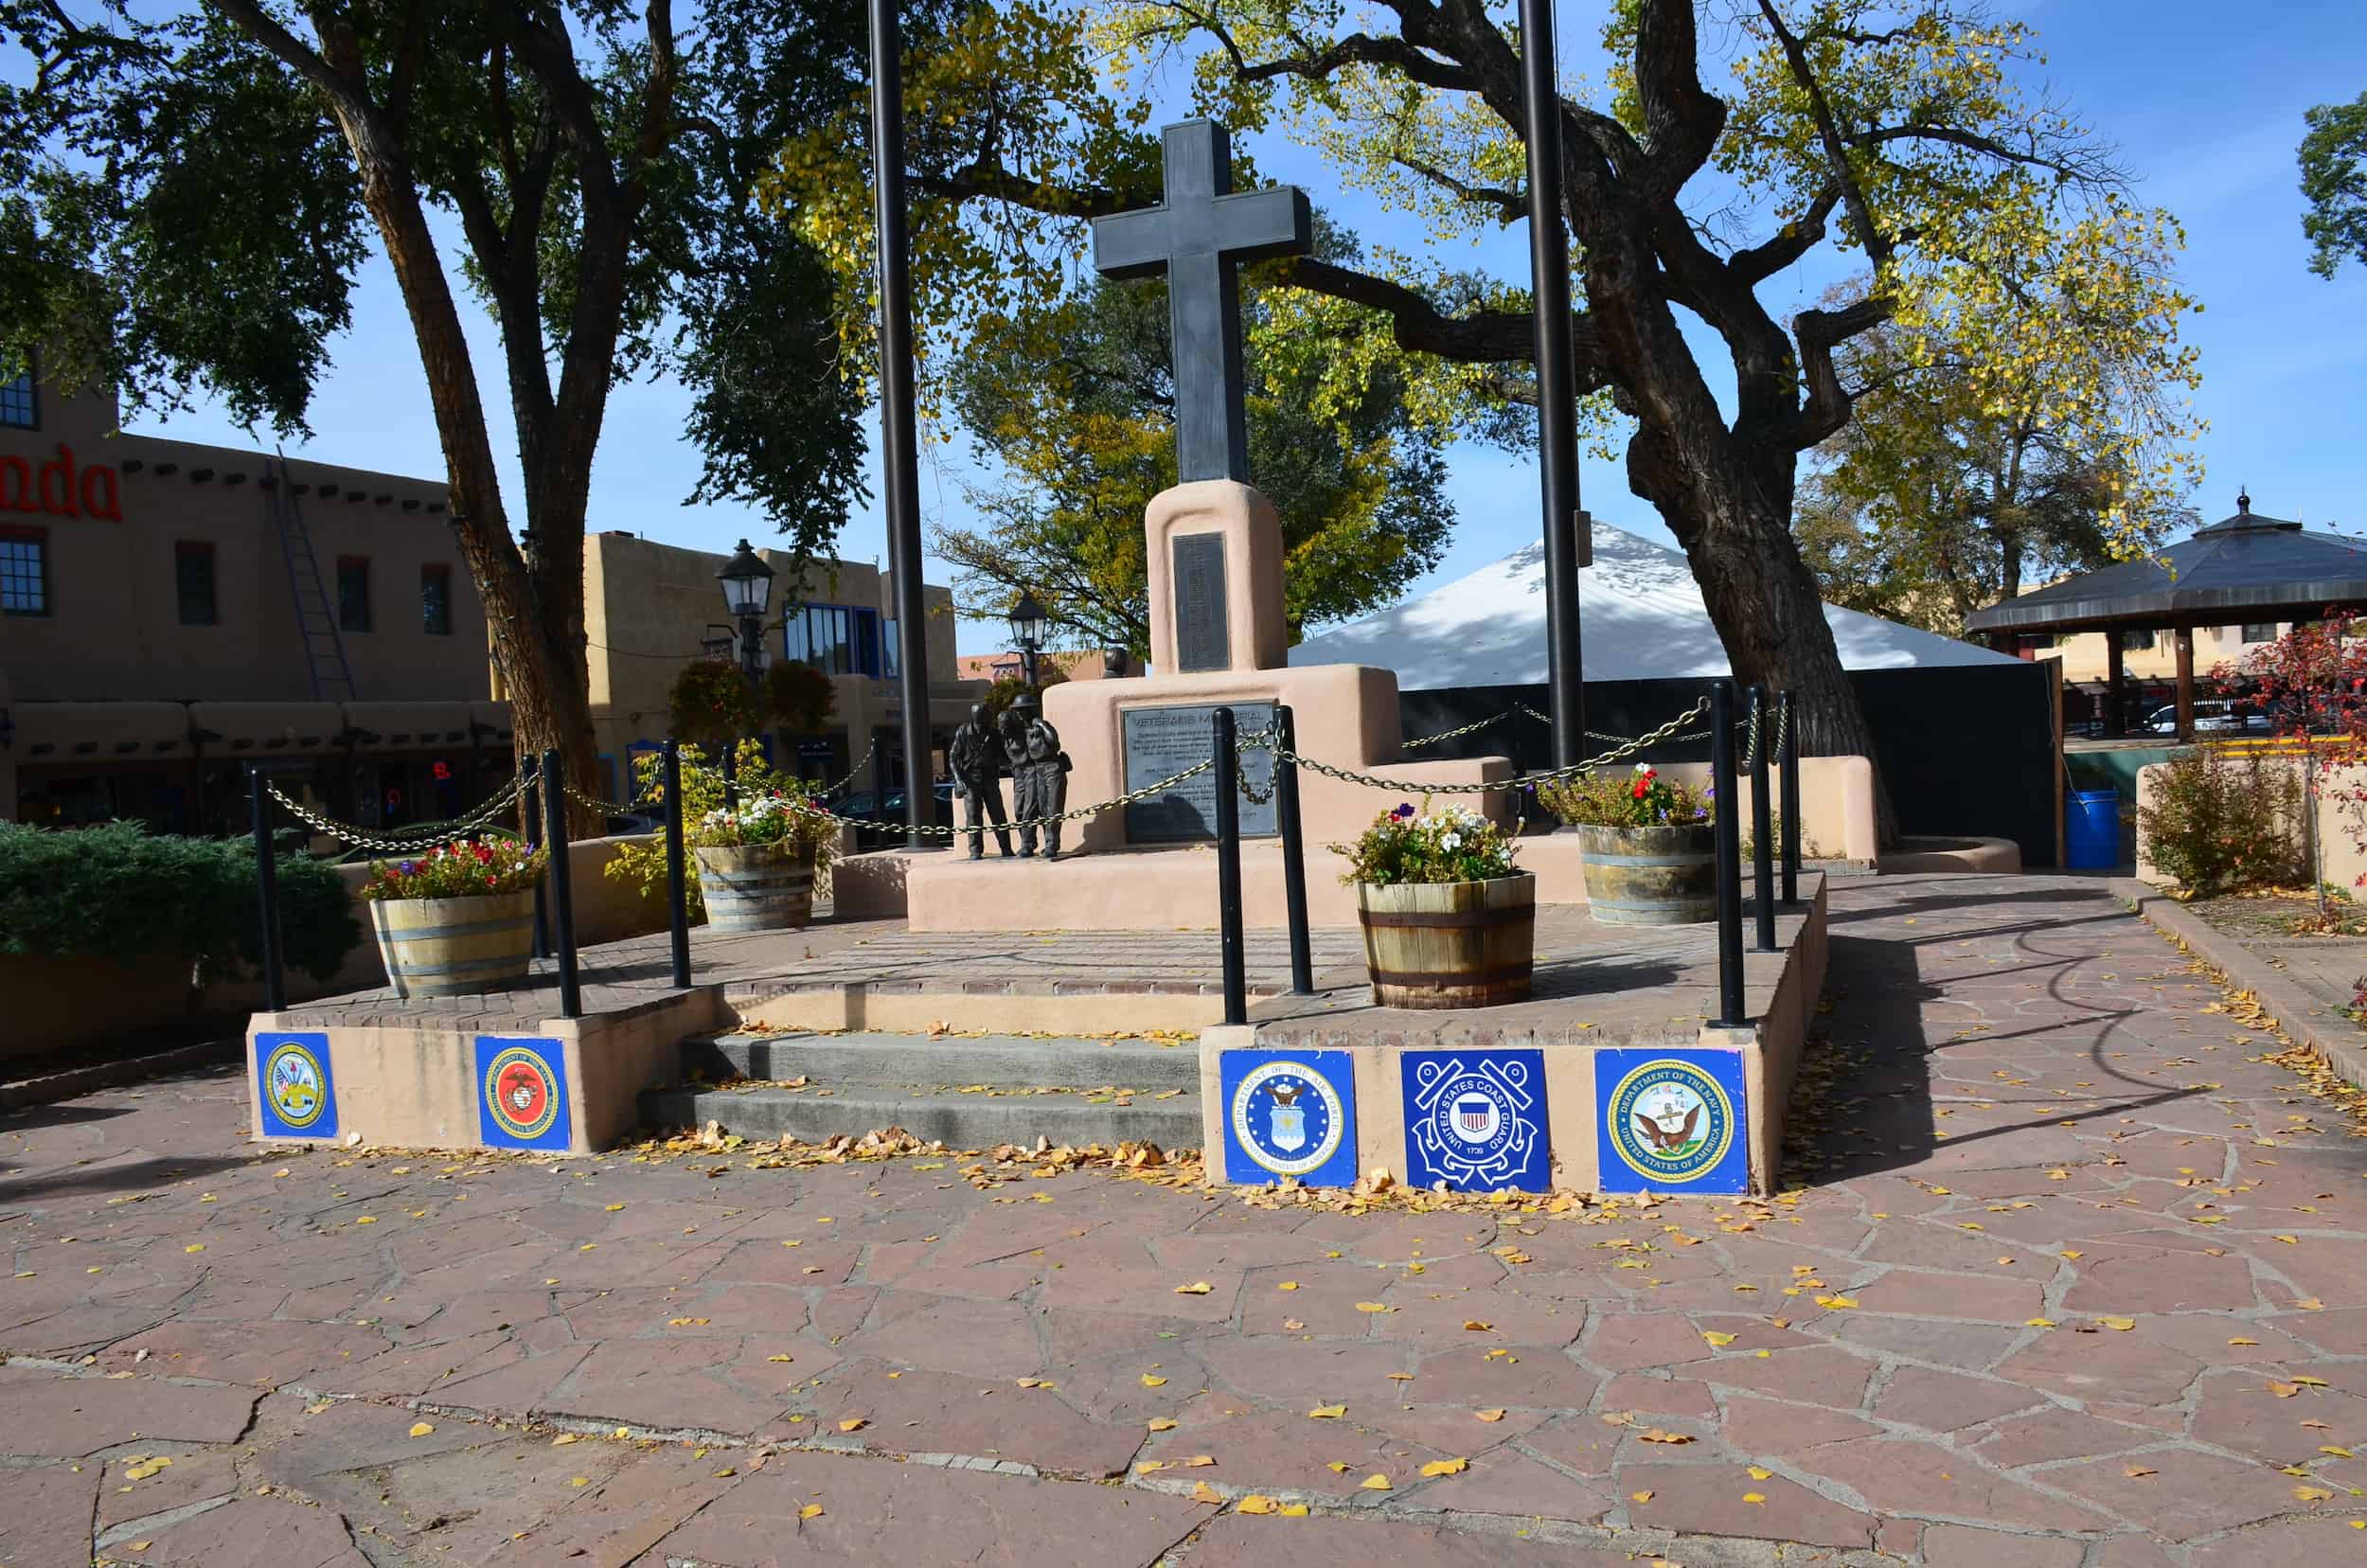 Center of the plaza where the flagpole stands